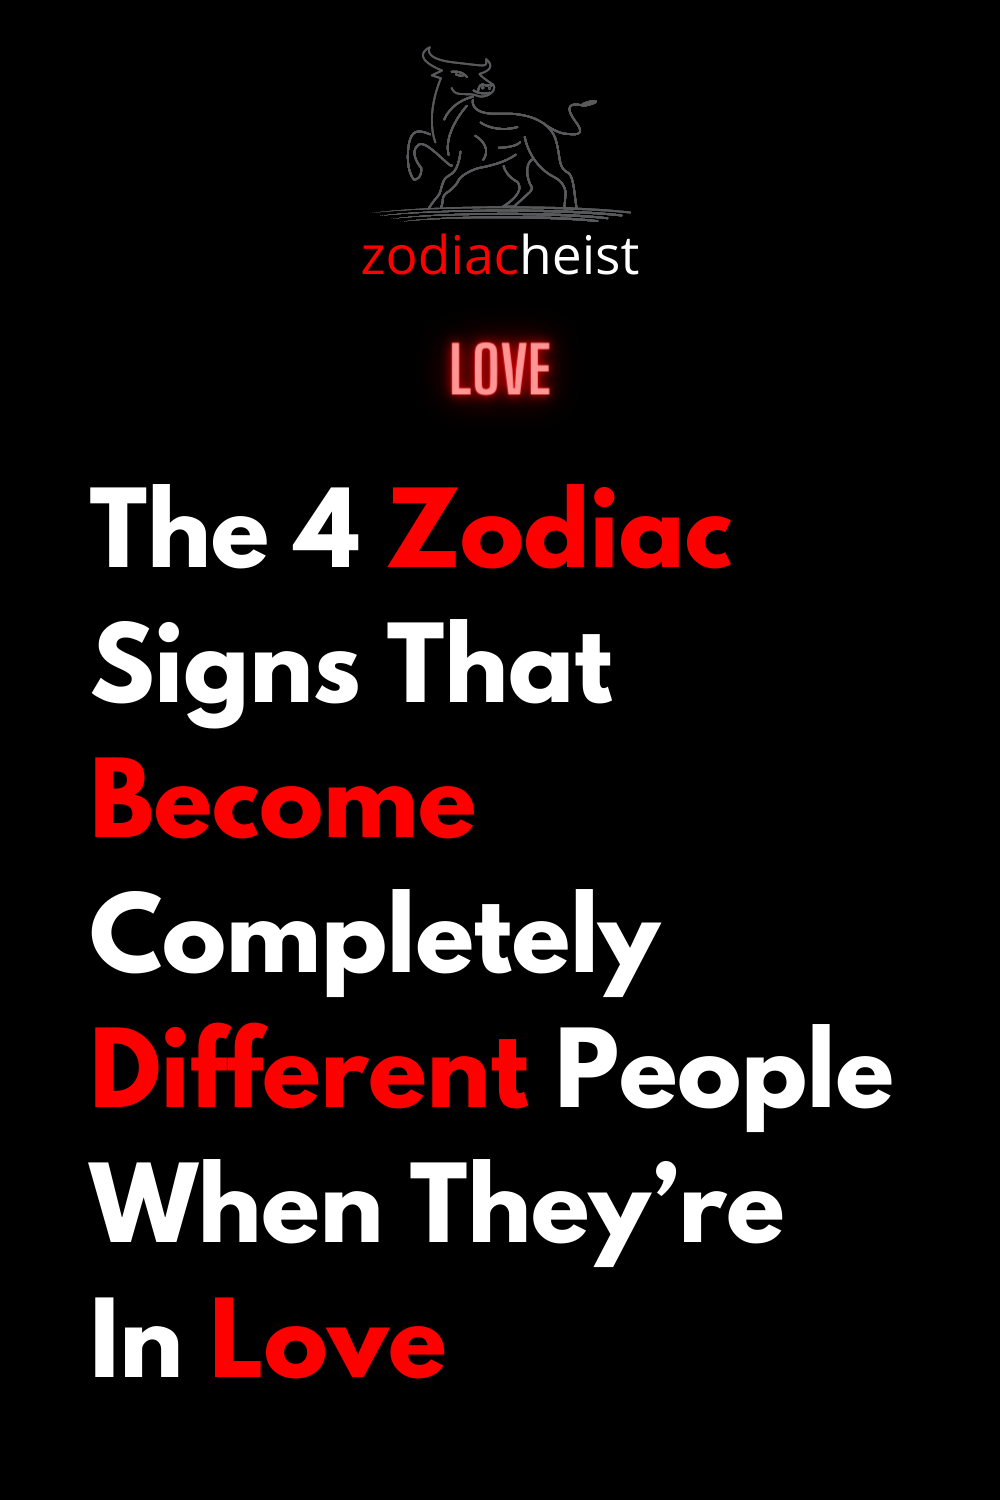 The 4 Zodiac Signs That Become Completely Different People When They’re In Love